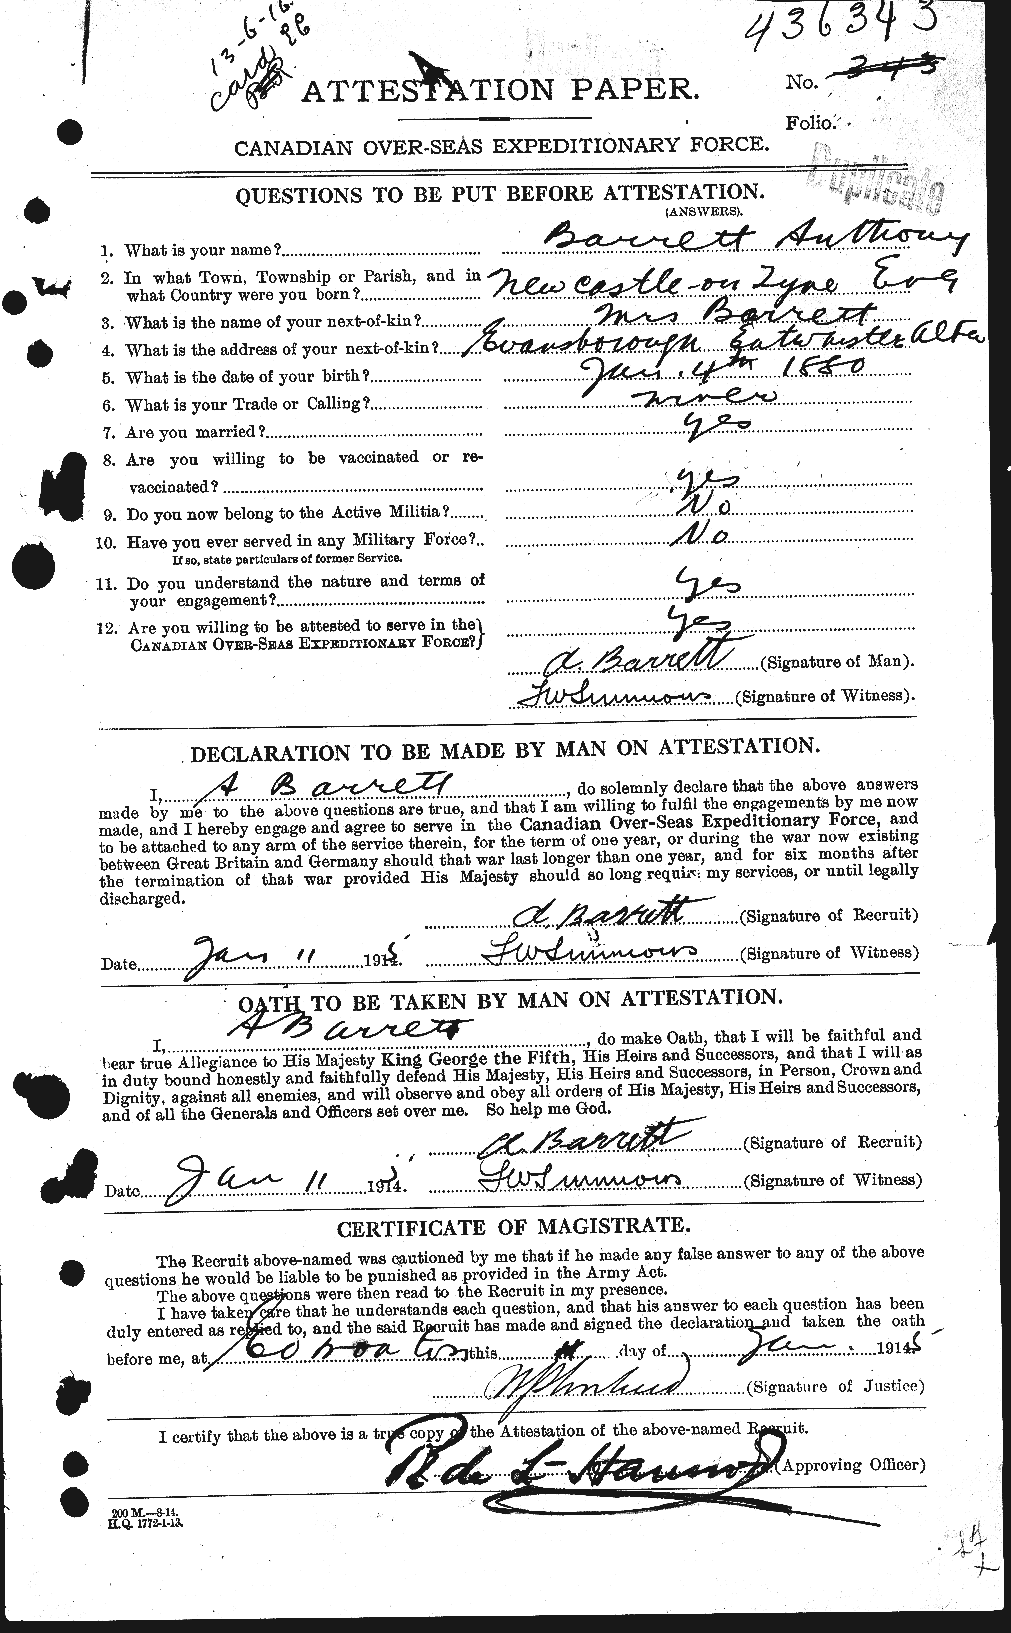 Personnel Records of the First World War - CEF 222253a